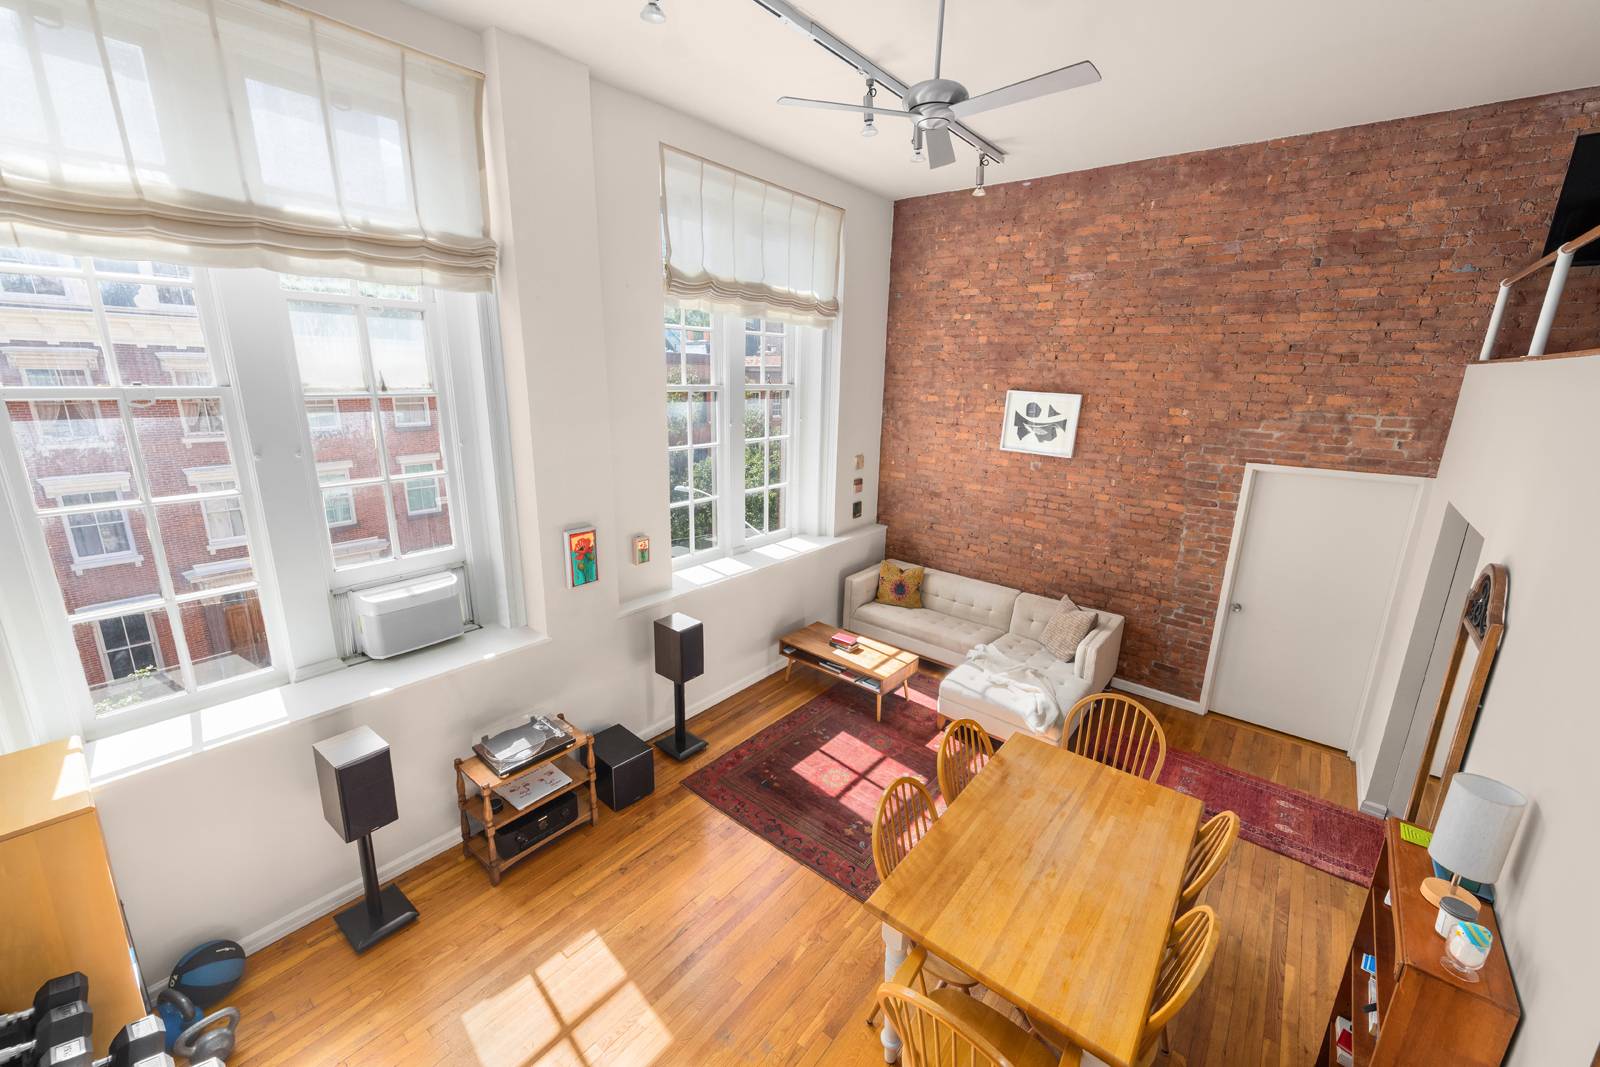 DECEMBER 15 MOVE IN. Located in the Charlton King Vandam Historic district, welcome home to this spacious one bedroom, one bathroom loft like apartment.